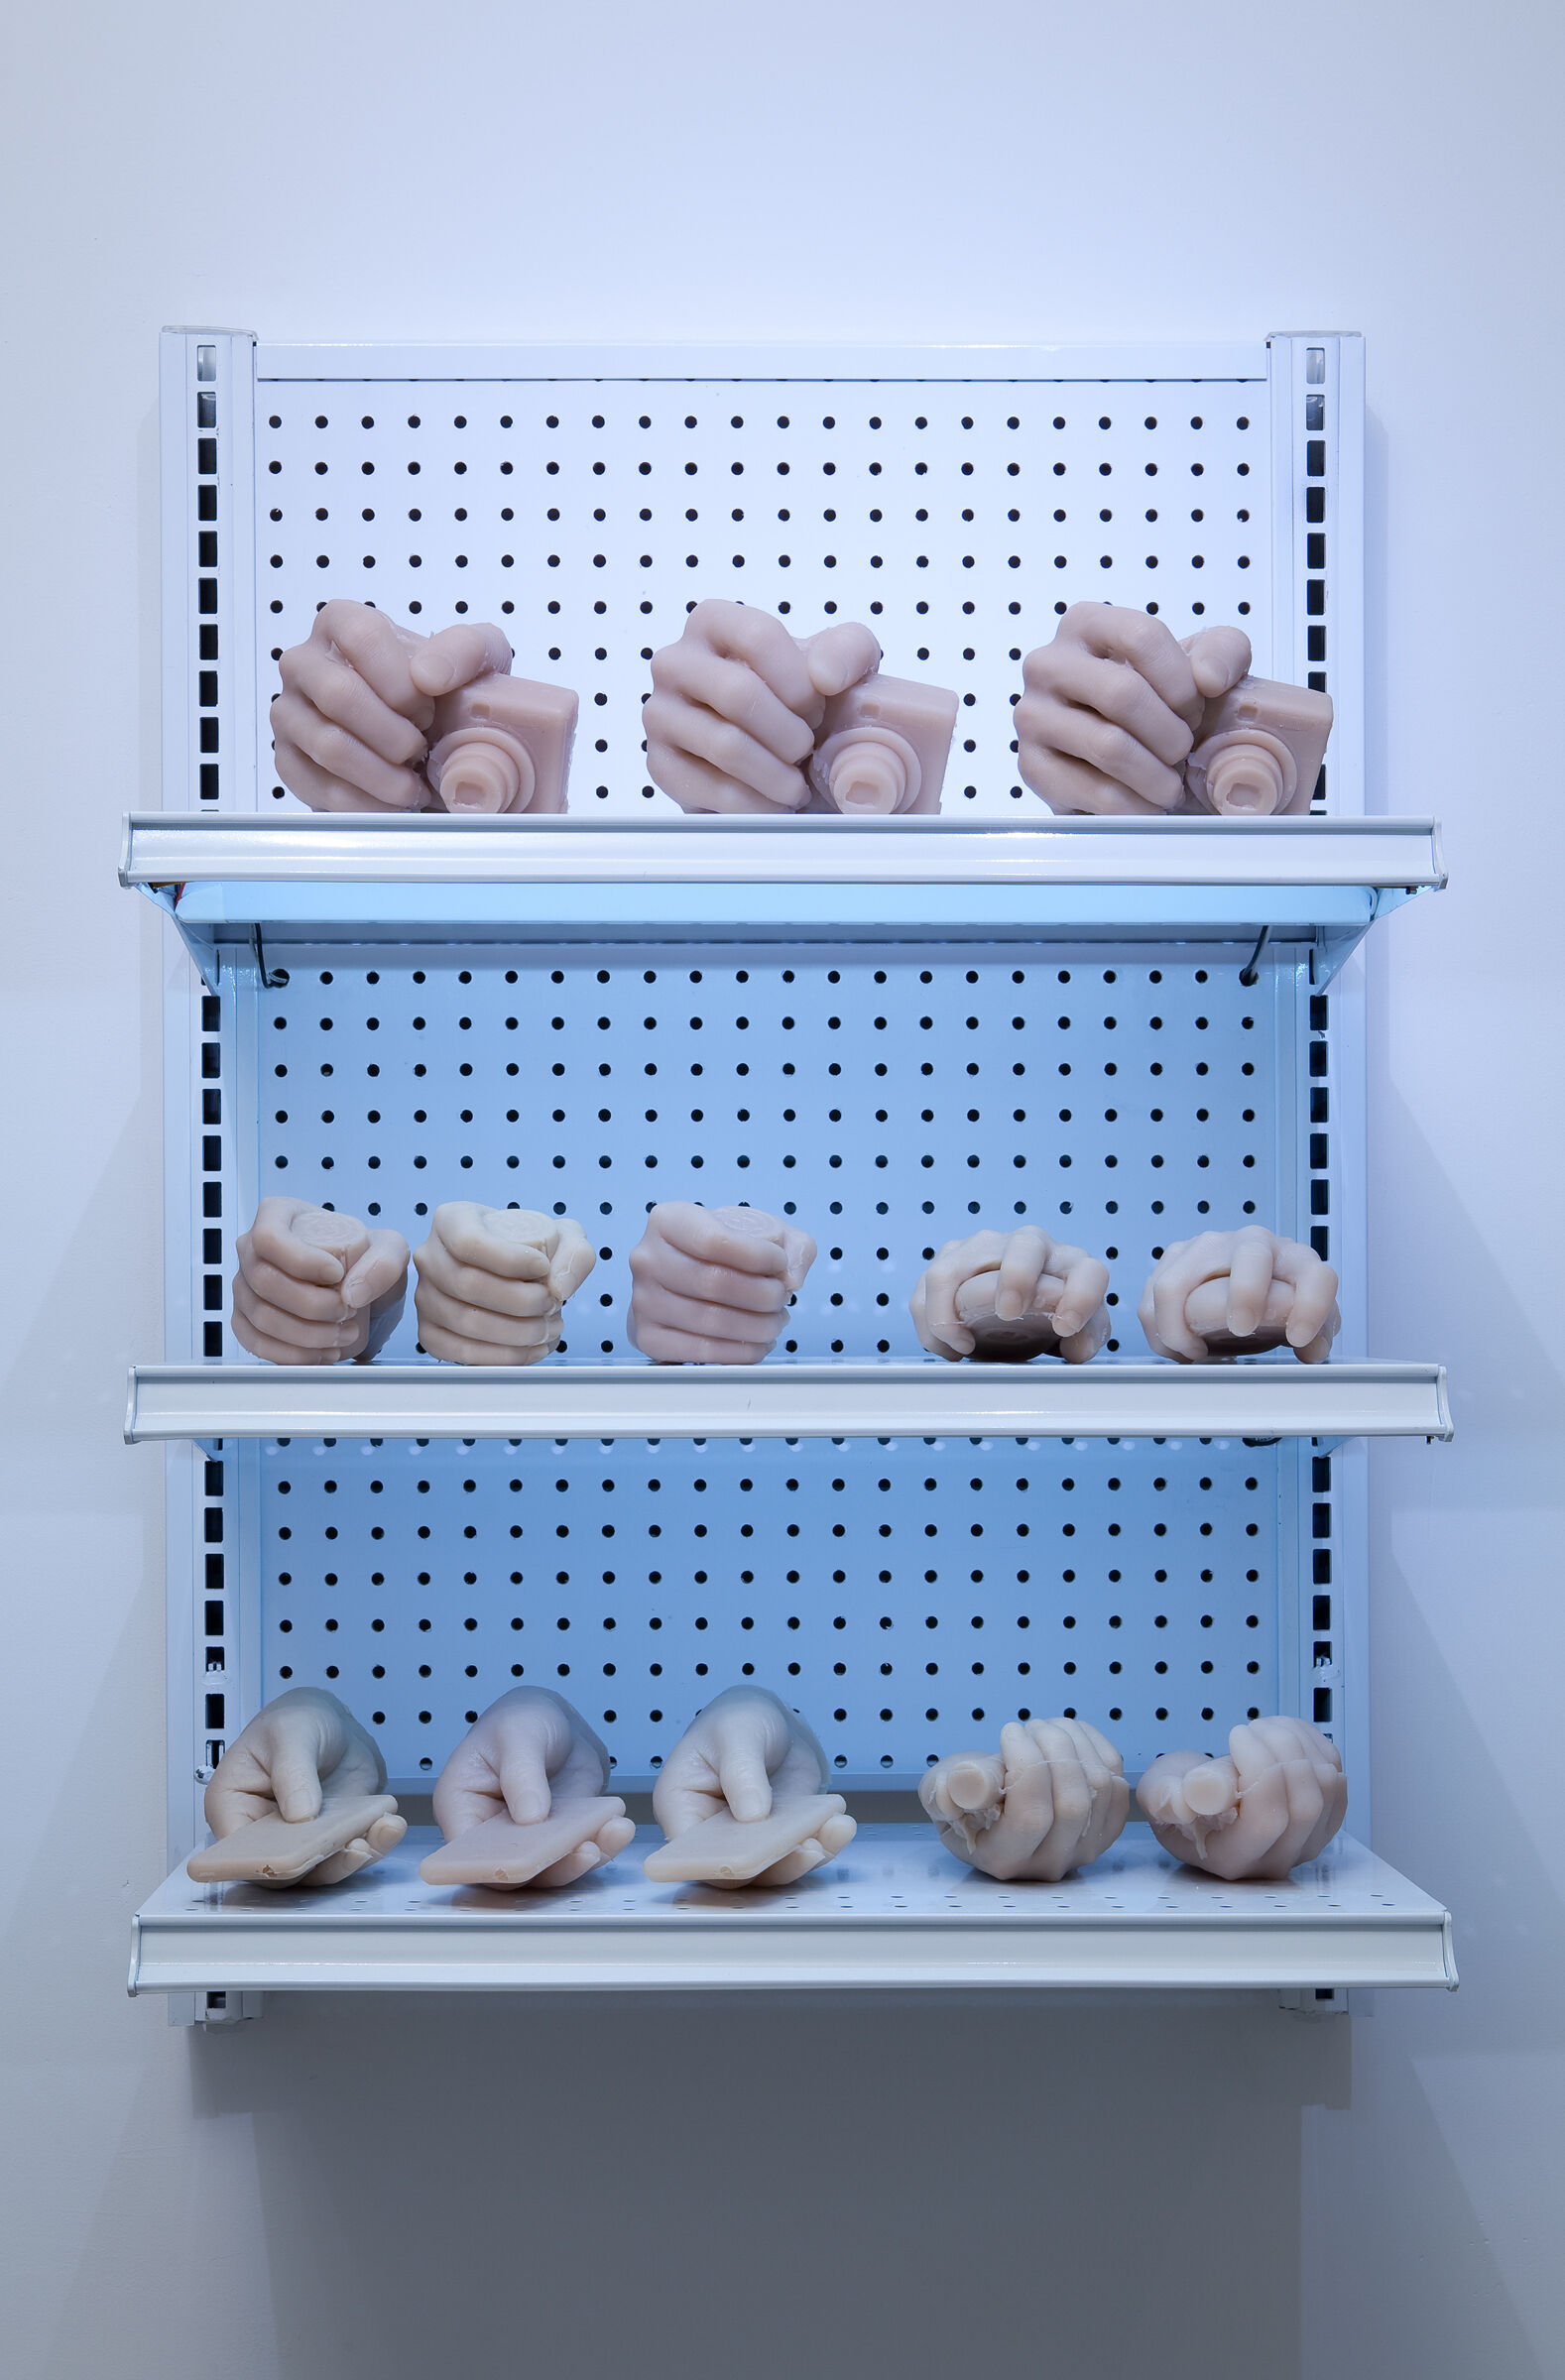 A shelf laden with sculptures of hands holding different items. 